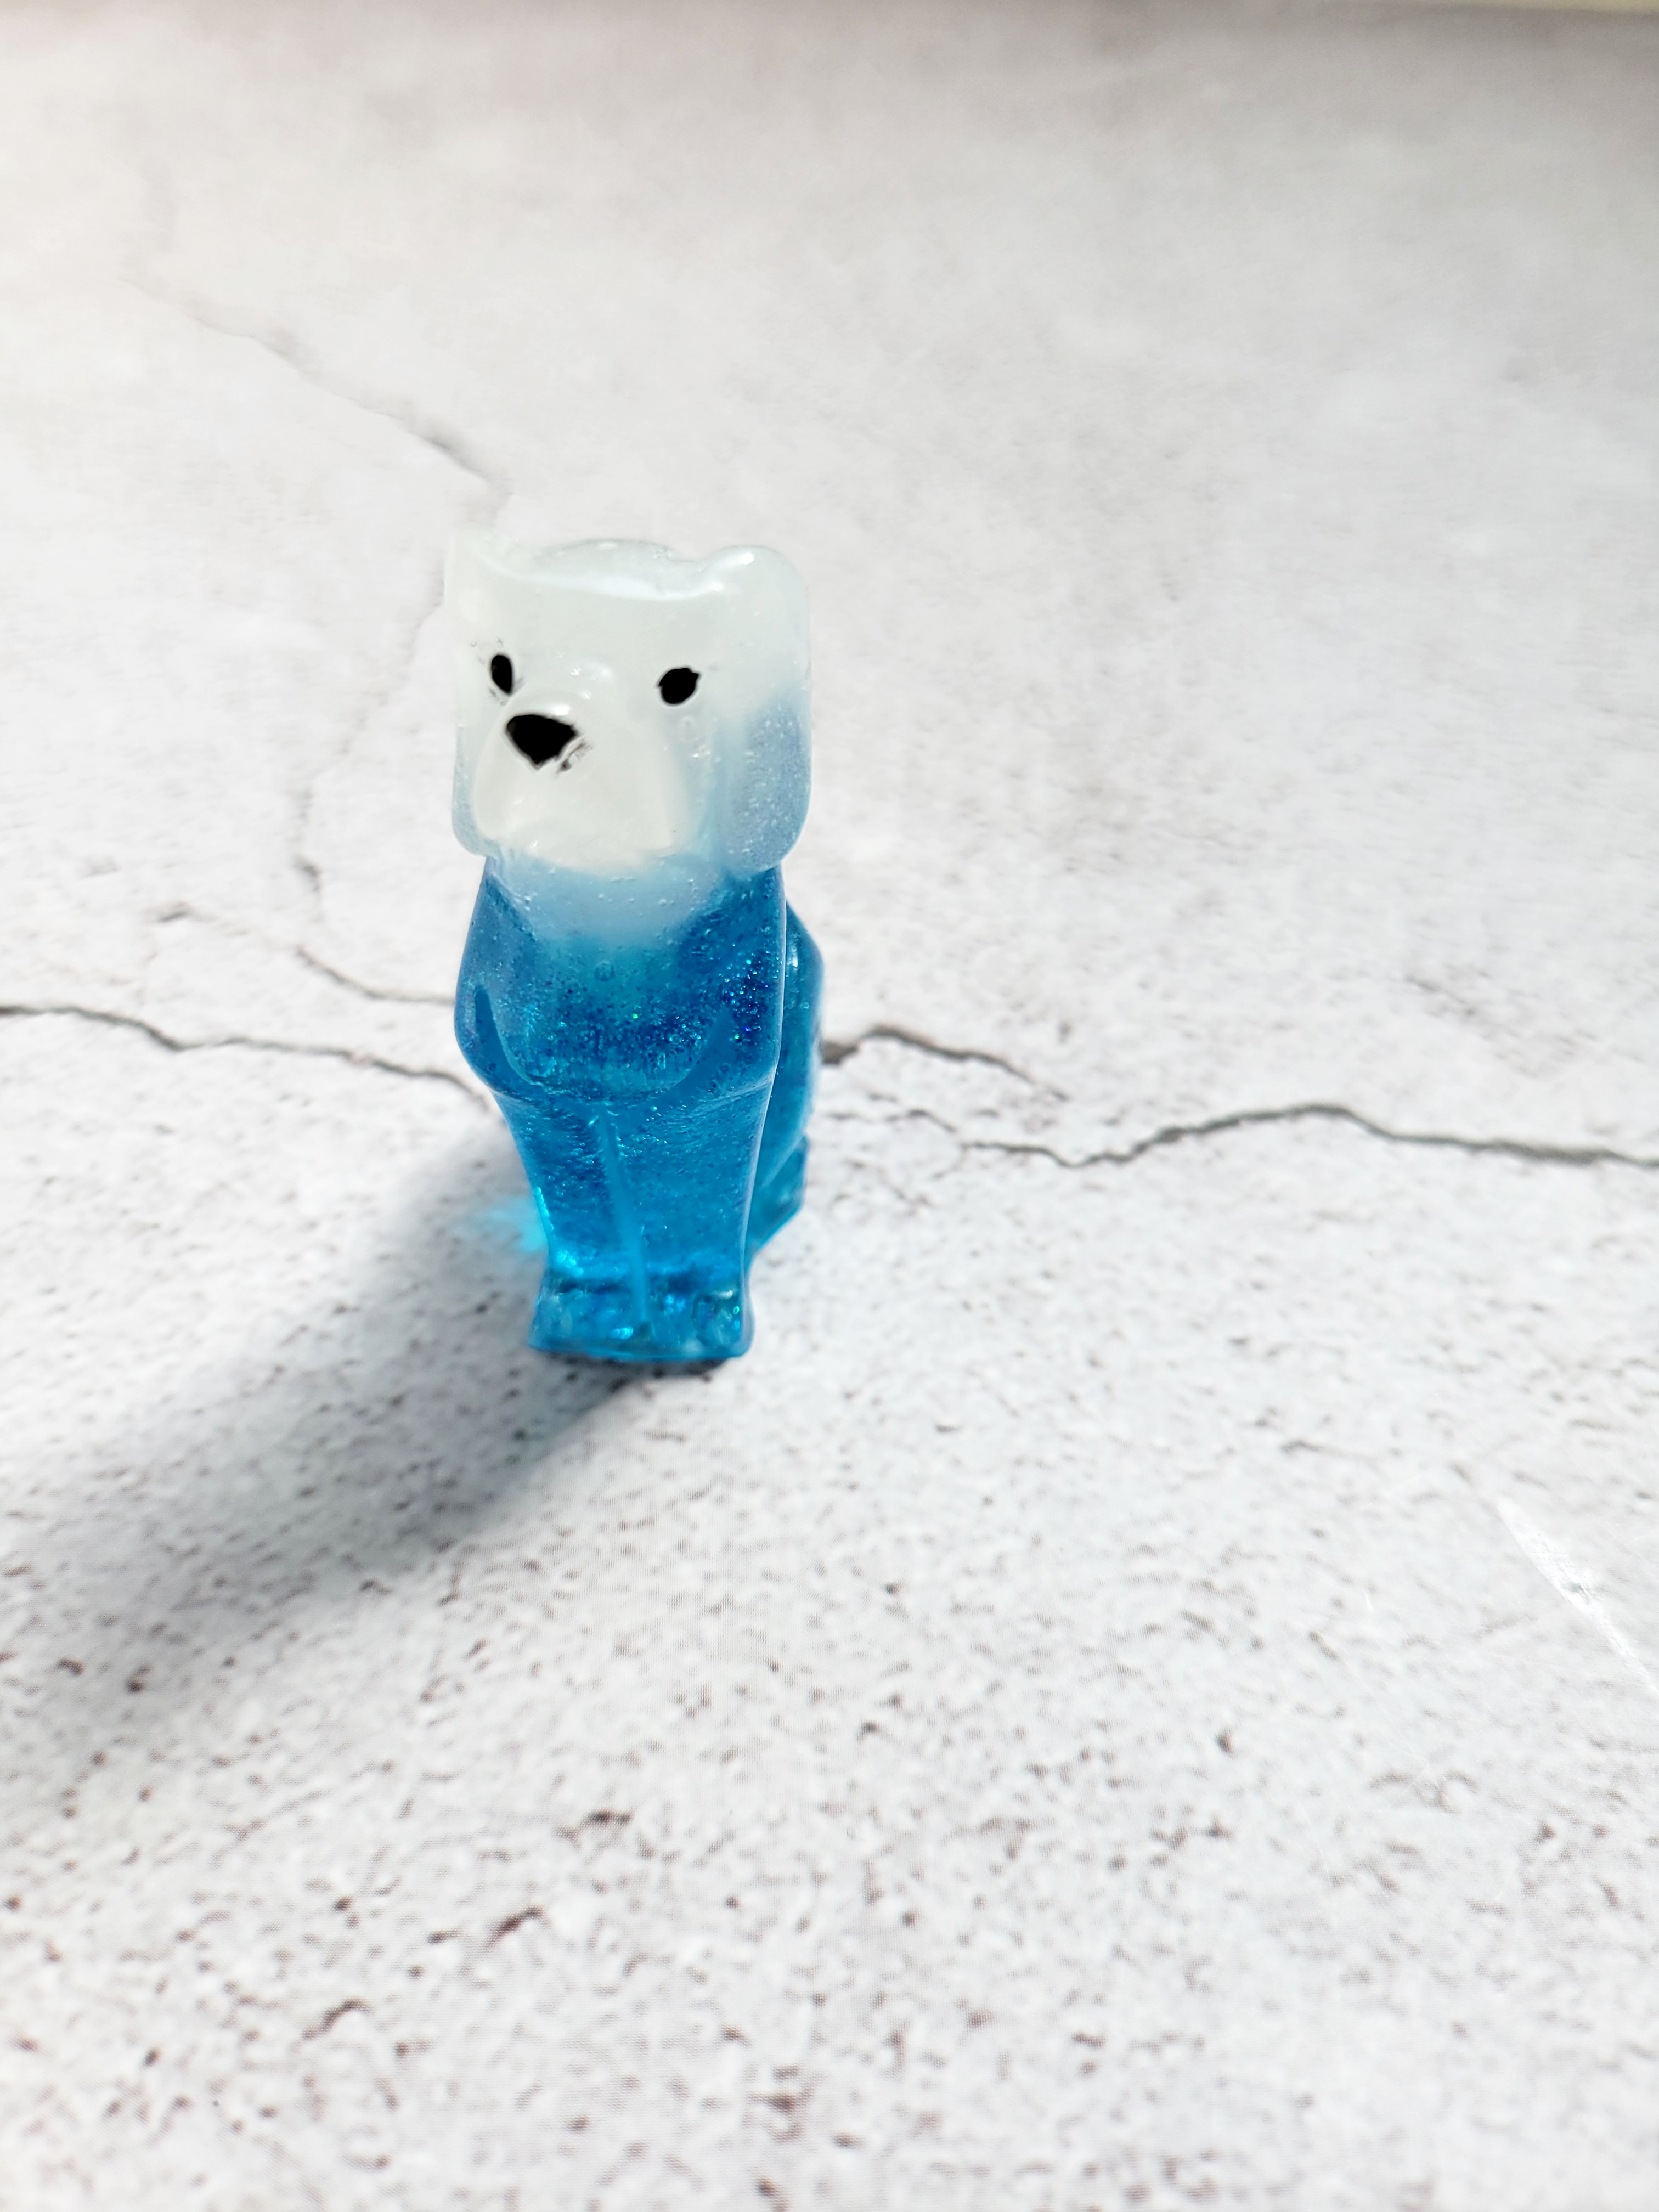 A front view of a tall slim dog figure with a translucent blue body, white head, black painted eyes and nose.